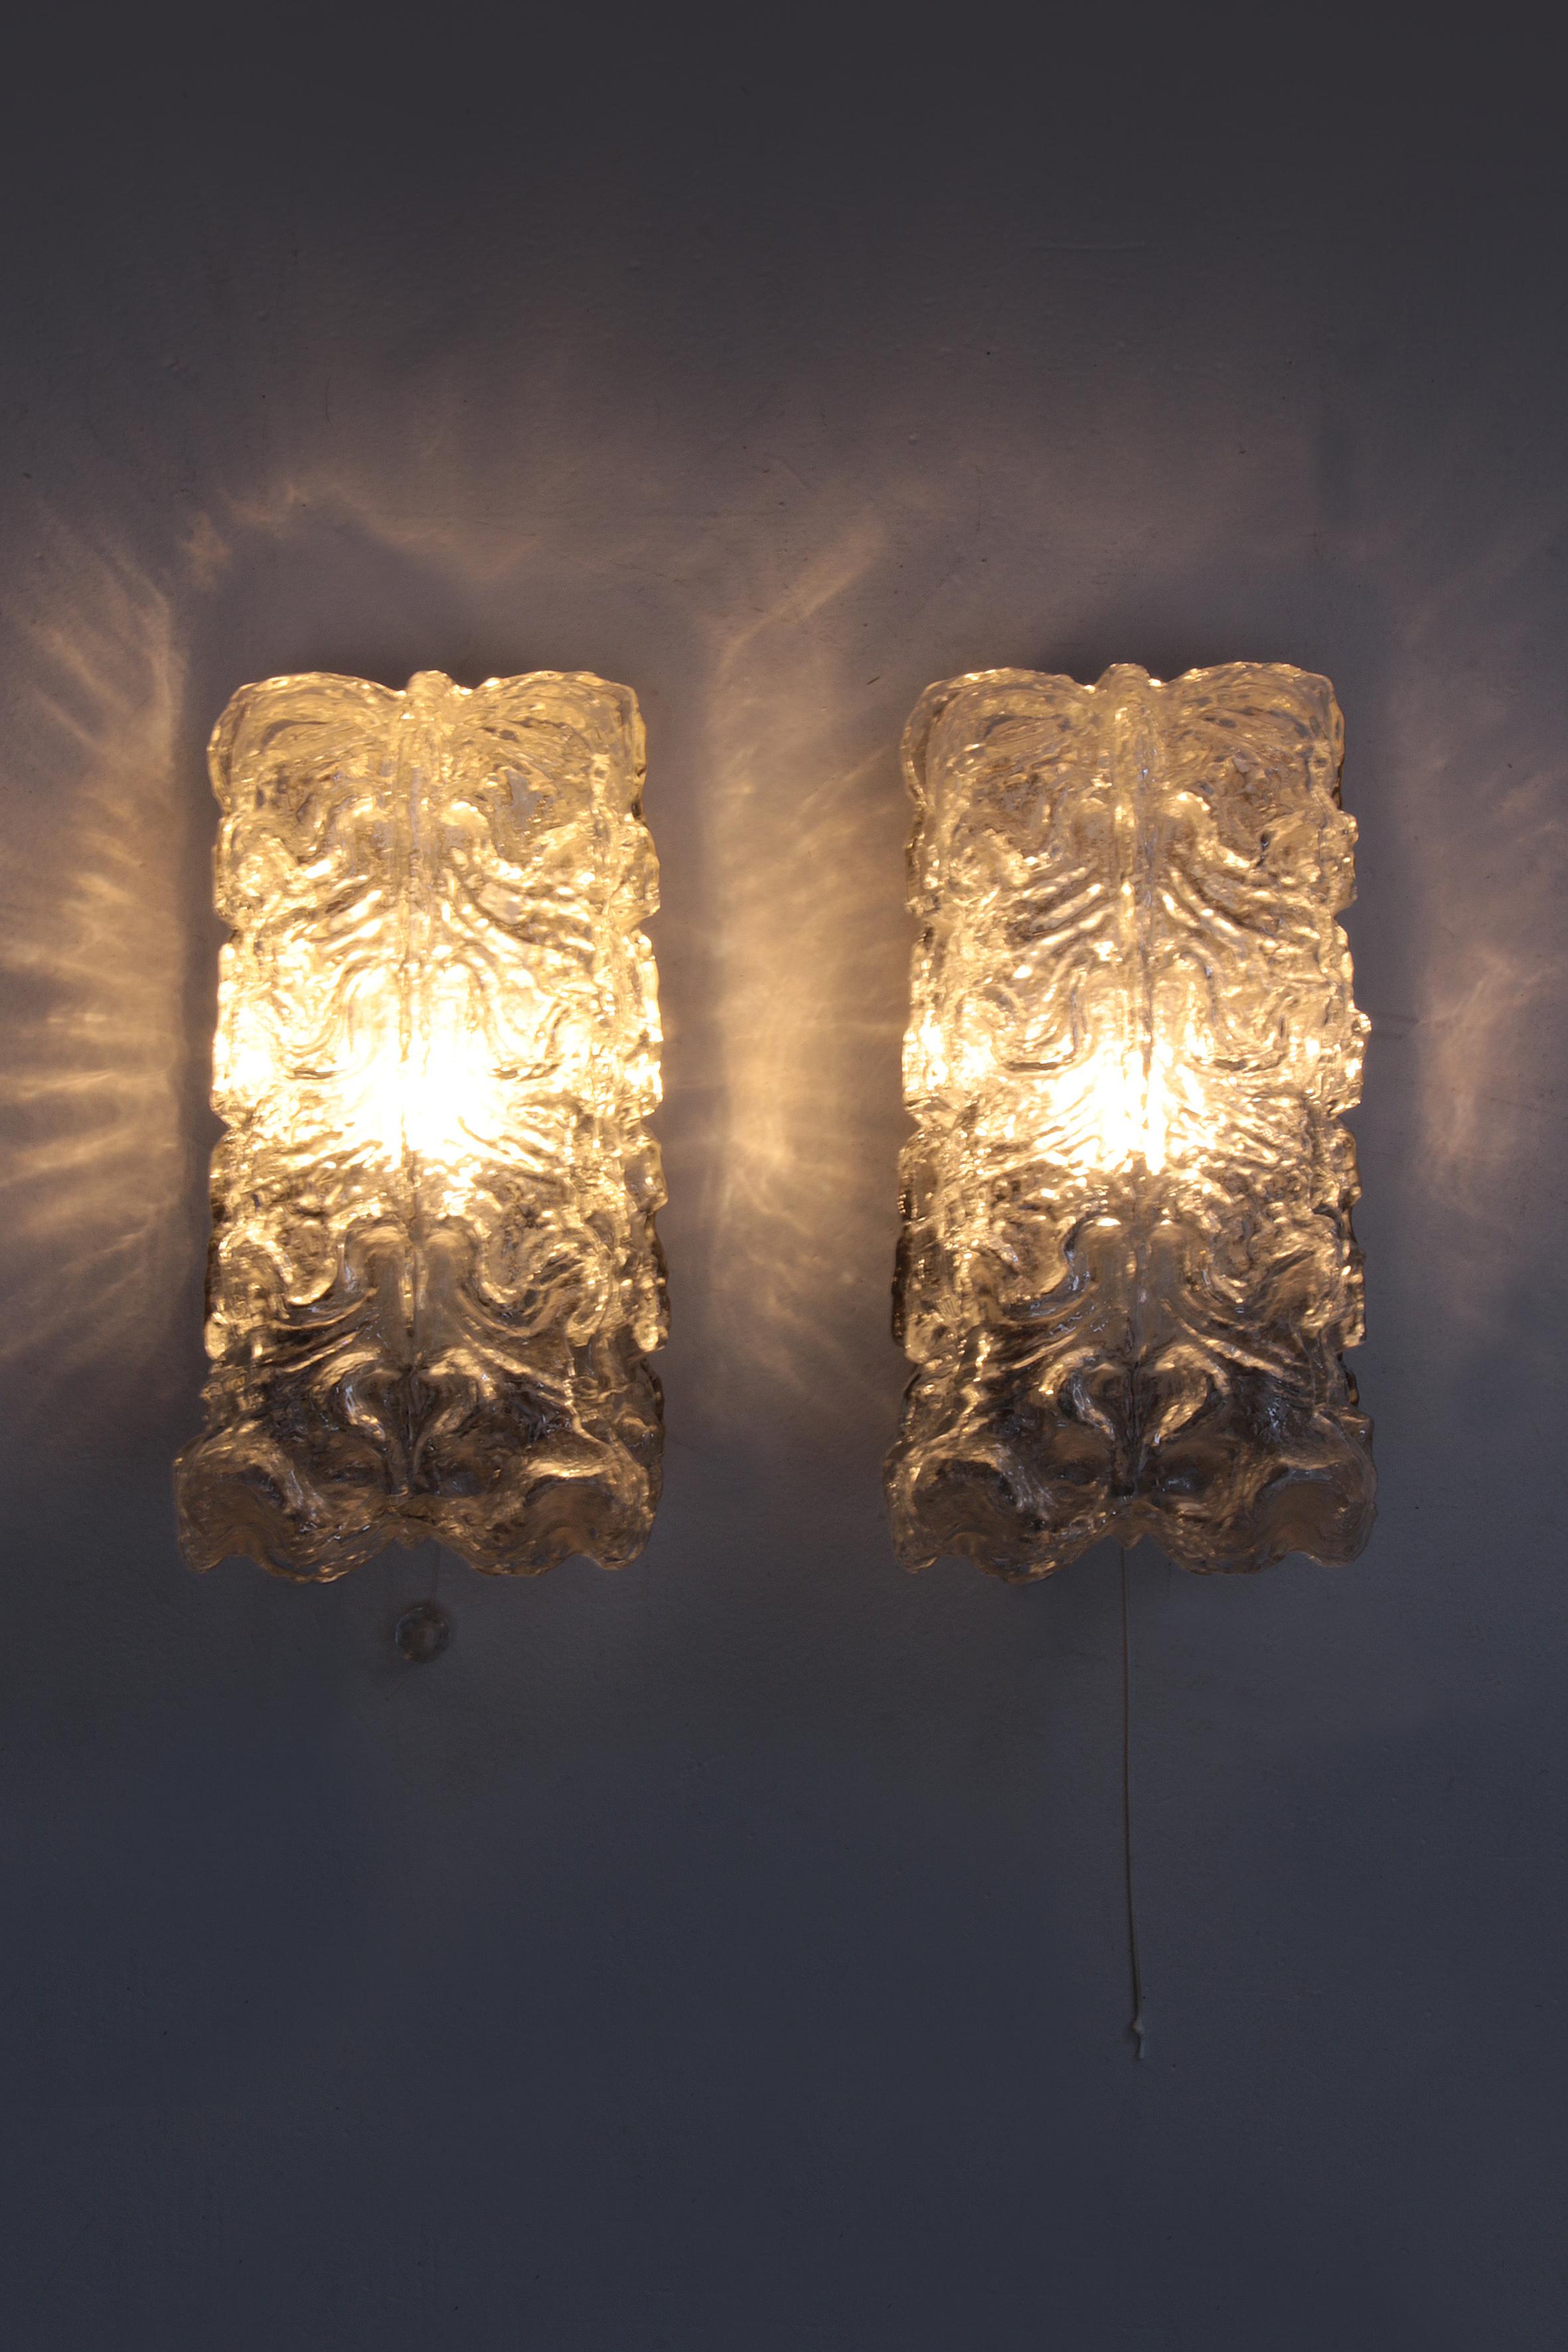 Metal Pair of Glashutte Limburg Wall Lamps Made of Glass, 1960, Germany For Sale